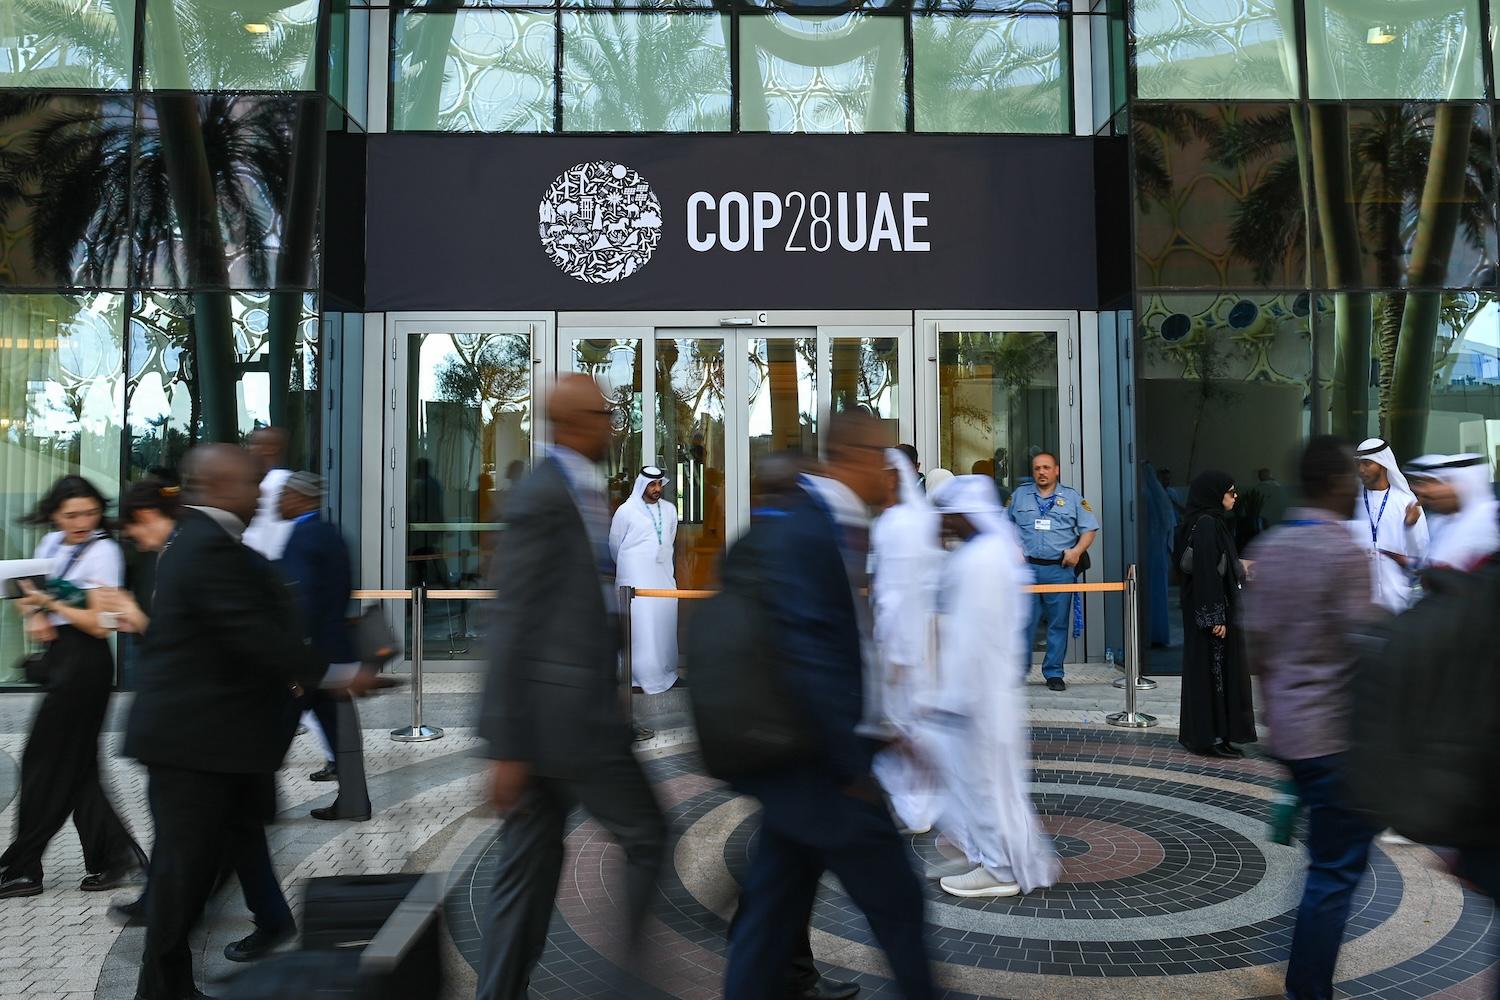 The Blue Zone at COP28 in the UAE